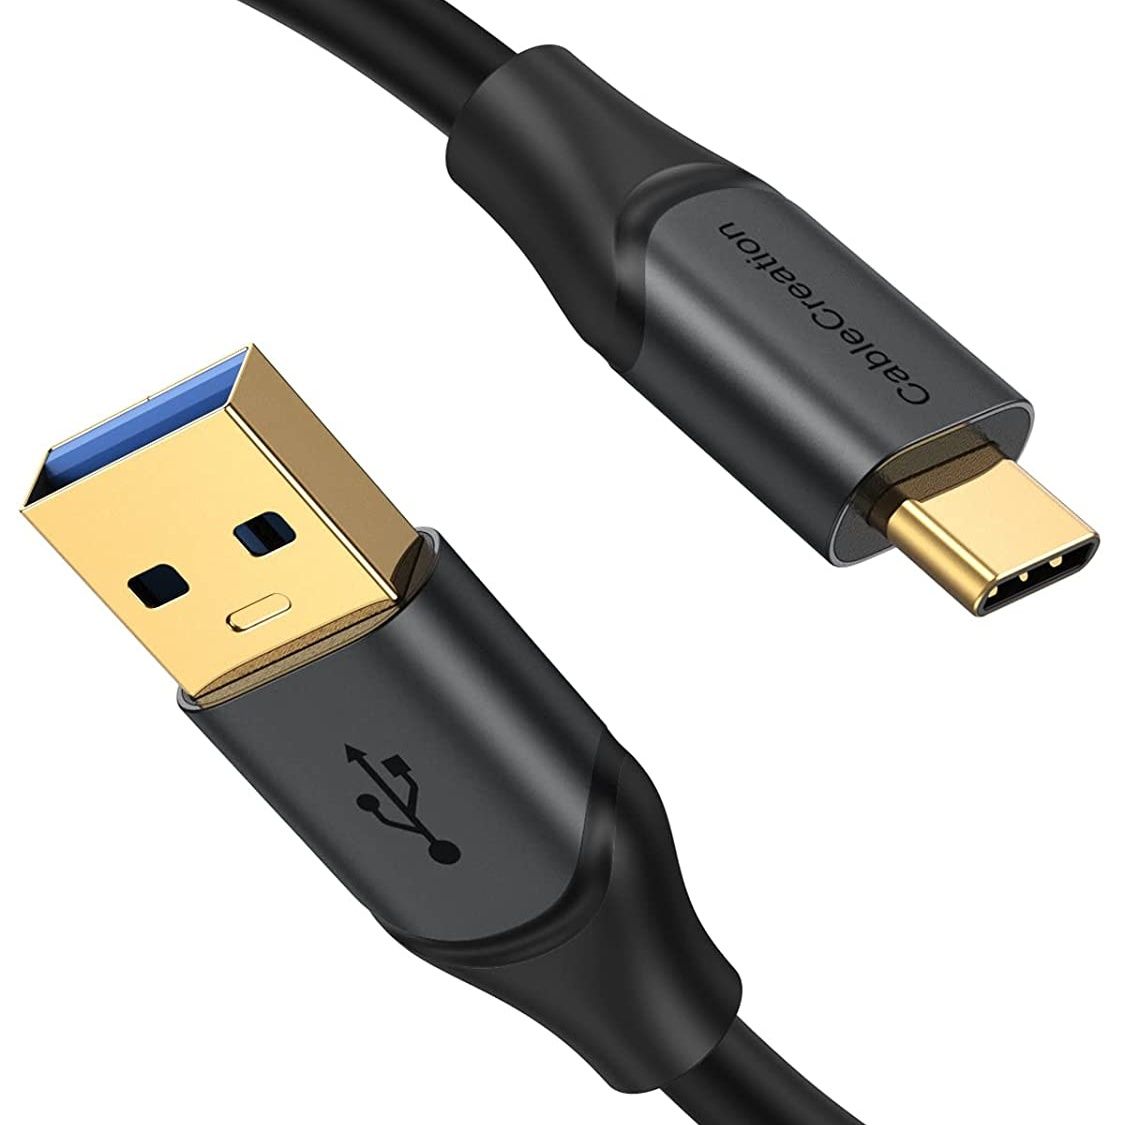 The Best Android Auto USB Cable 